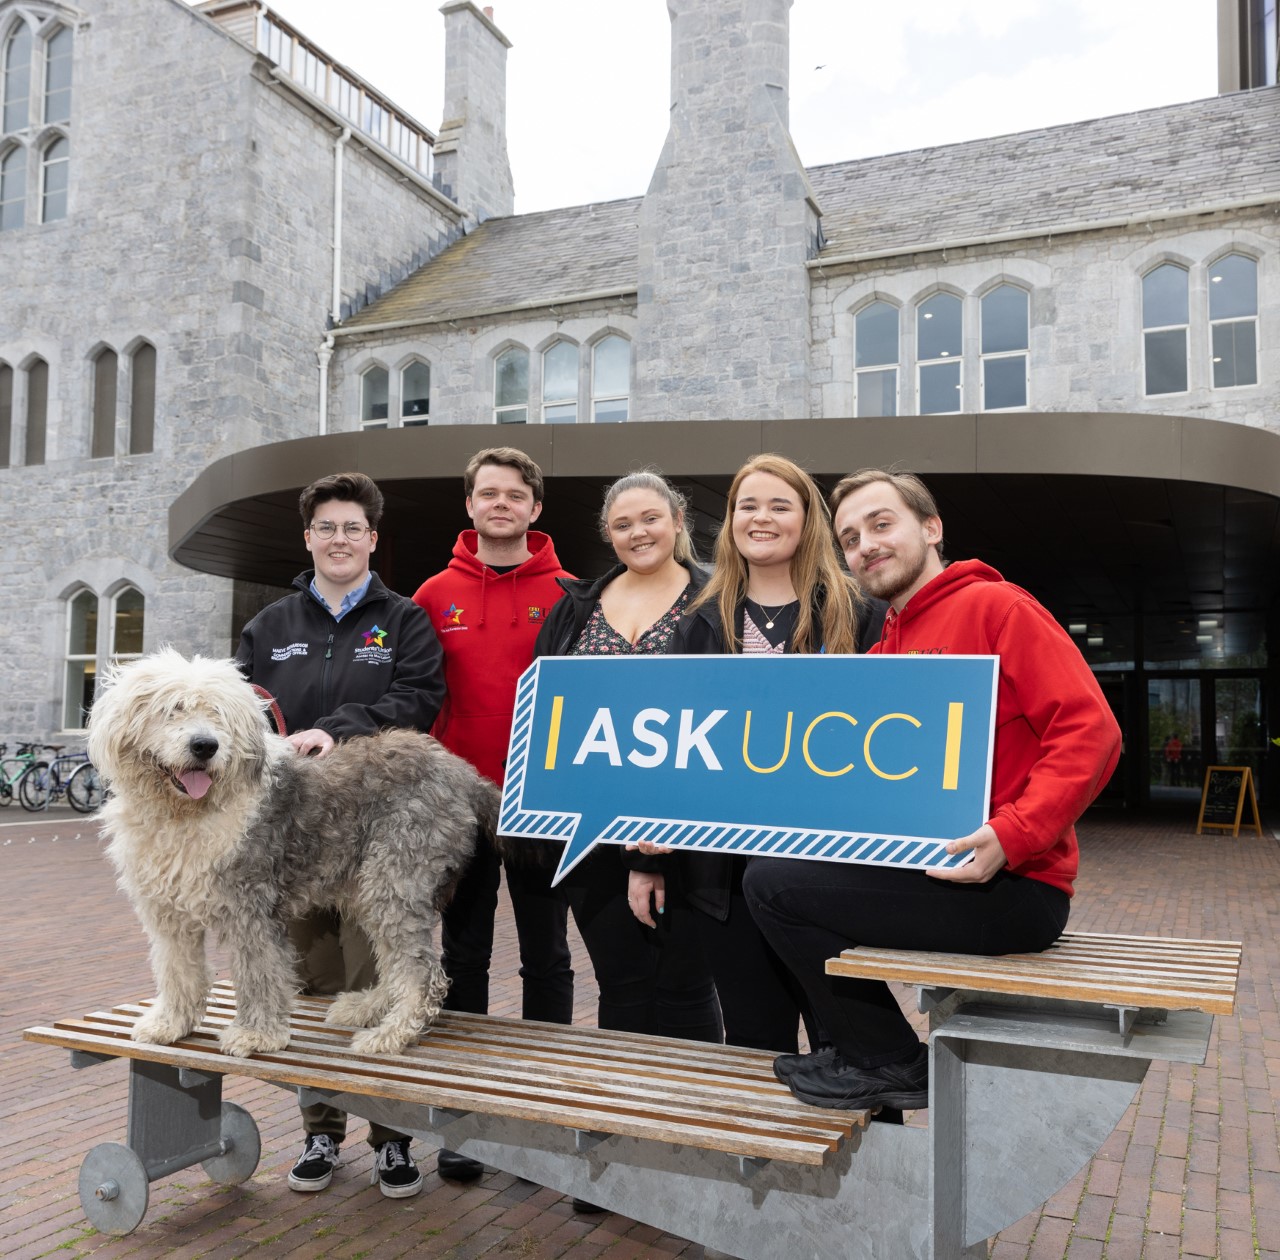 The ASK UCC website officially launched!